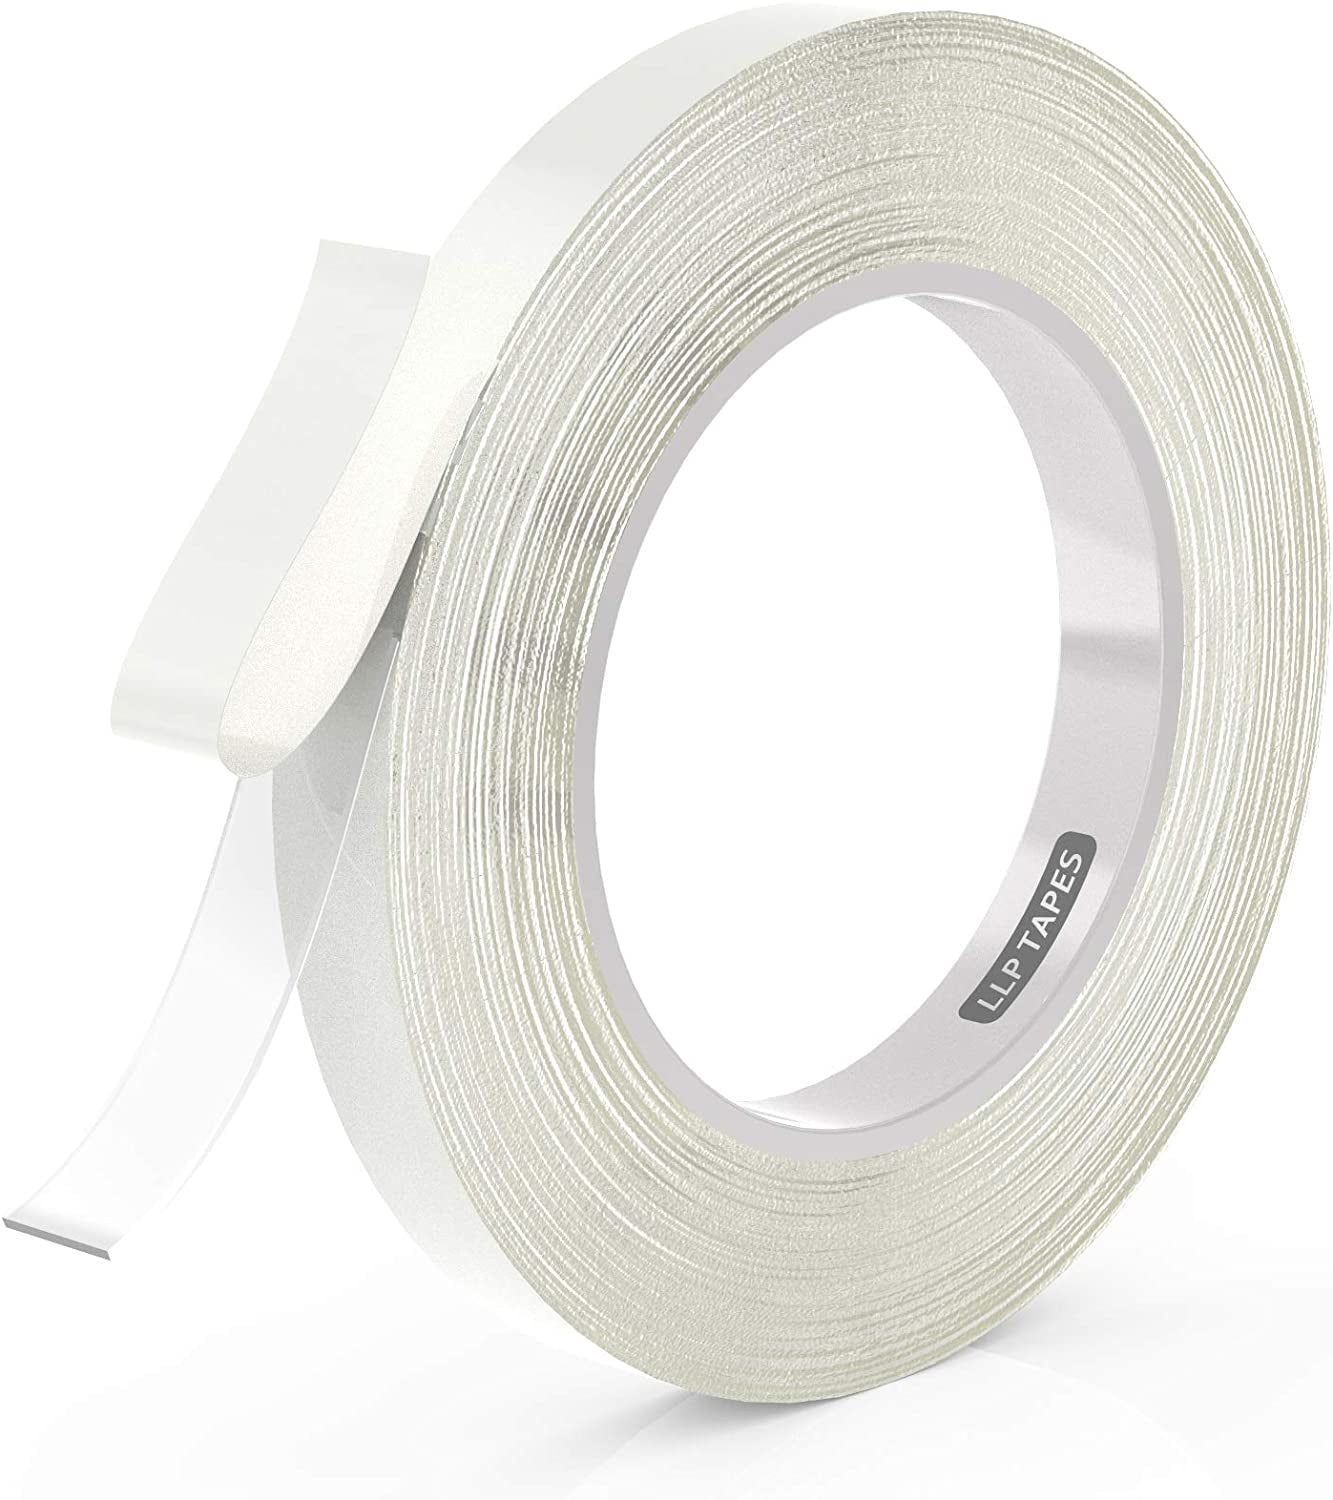 LLPT, LLPT Double Sided Tape Clear Acrylic Strong Mounting Tape 3/4 Inch X 120 Inch Multiple Residue Free Waterproof Outdoor Indoor Adhesive(Wa053)